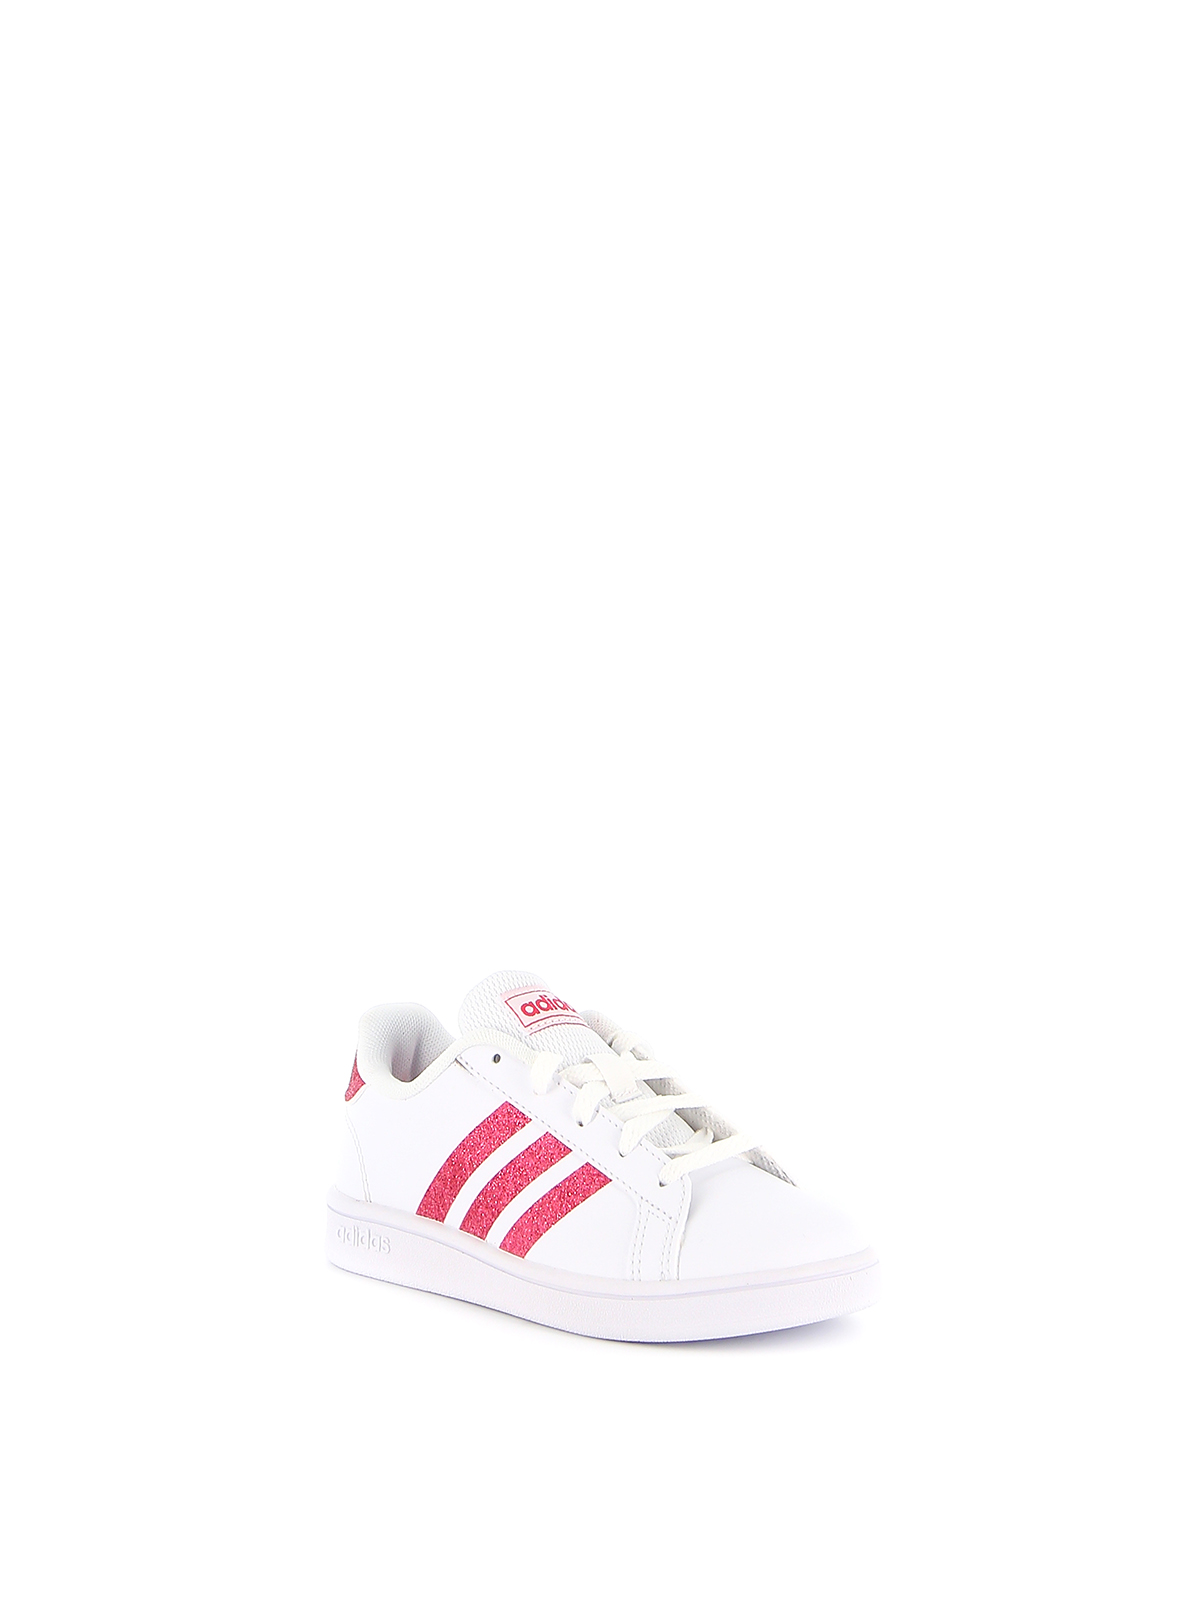 Adidas - Grand Court K sneakers 